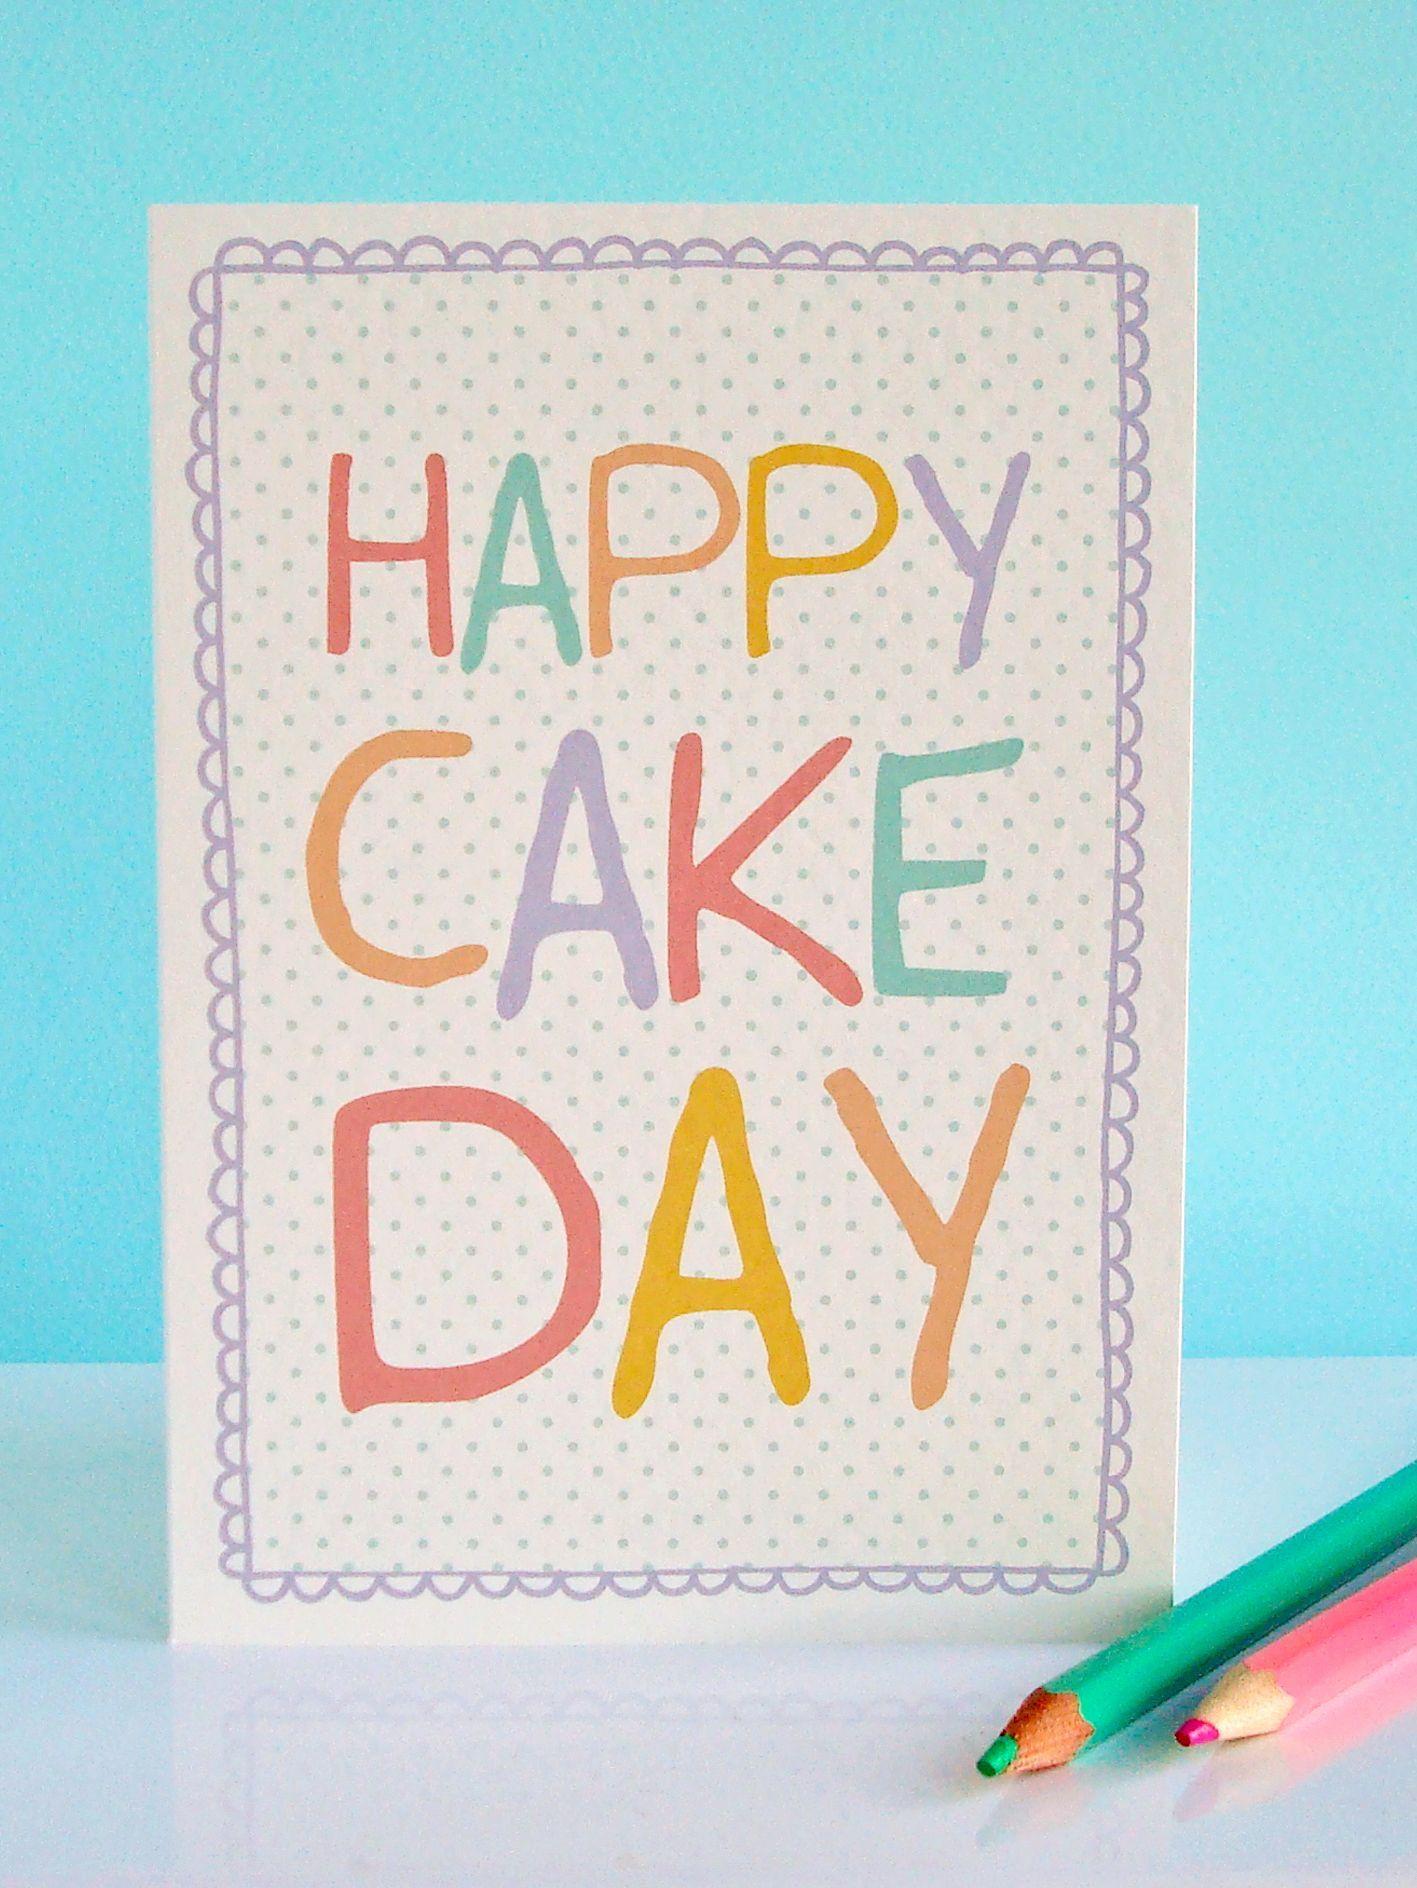 'Happy Cake Day' Greeting Card